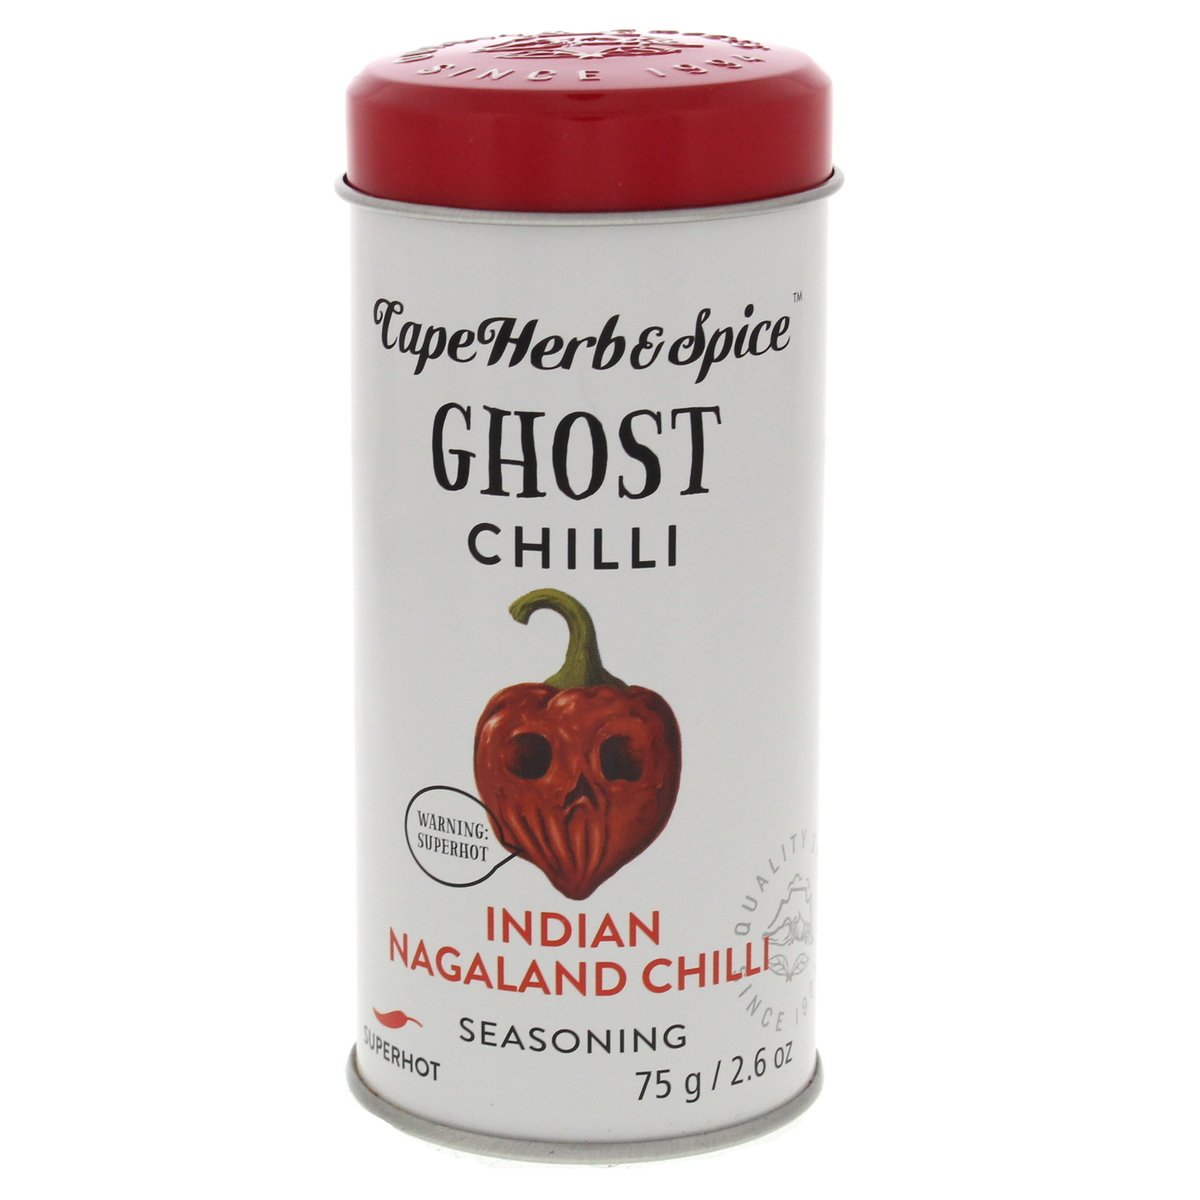 Cape Herb & Spice Ghost Chilli Indian Nagaland Chilli Seasoning 75 g